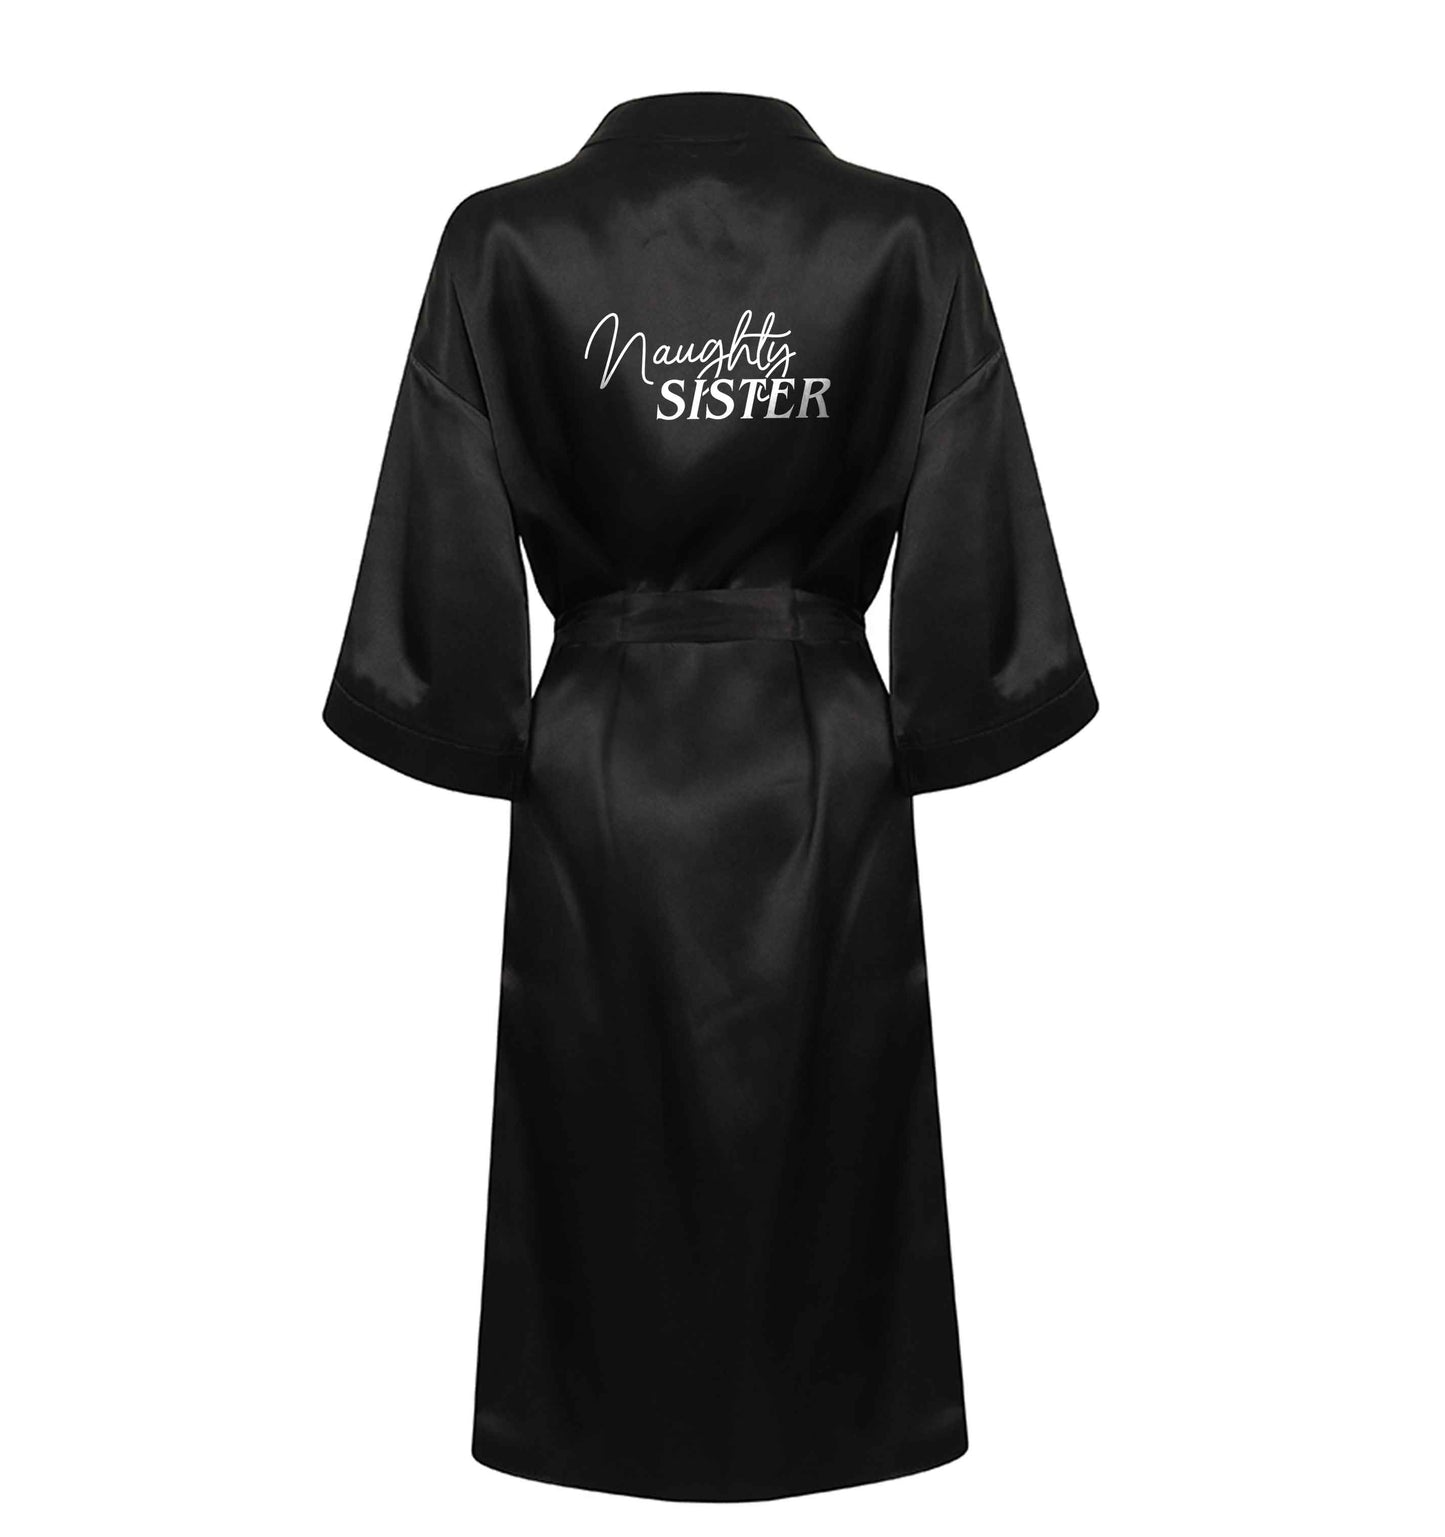 Naughty Sister XL/XXL black ladies dressing gown size 16/18